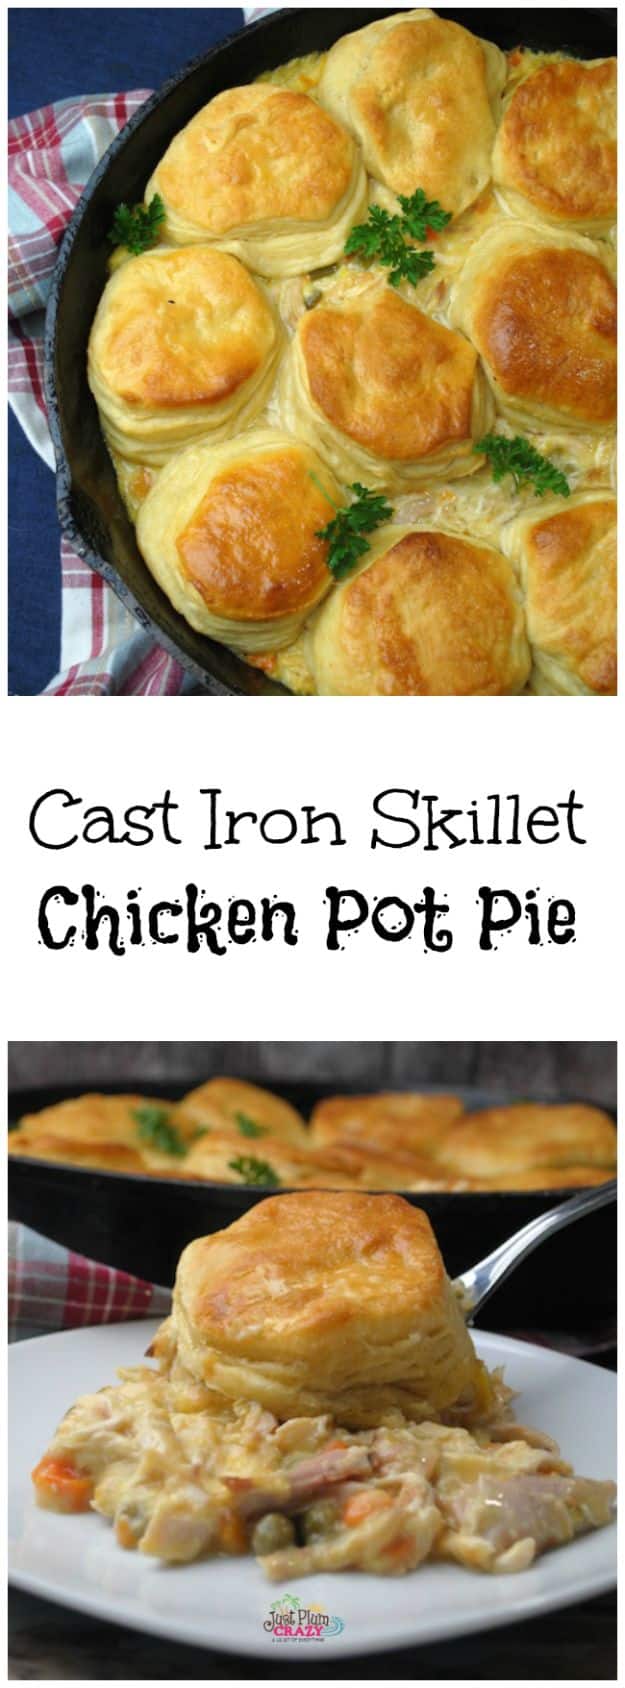 Easy Recipes For Rotisserie Chicken - Cast Iron Skillet Chicken Pot Pie - Healthy Recipe Ideas for Leftovers - Comfort Foods With Chicken - Low Carb and Gluten Free, Crock Pot Meals,#easyrecipes #dinnerideas #recipes